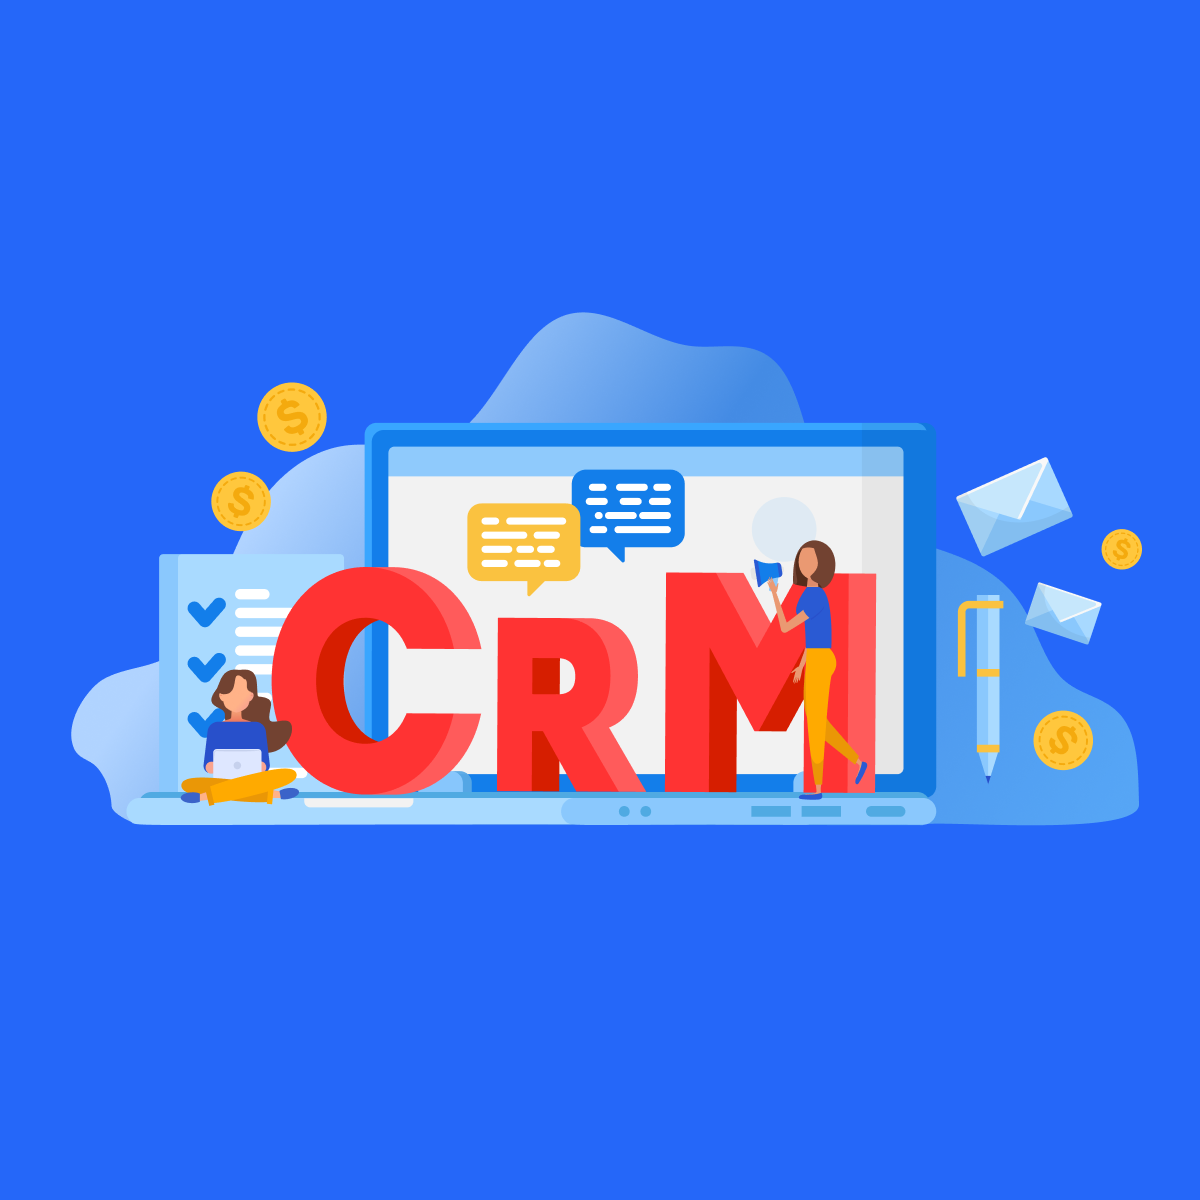 Benefits of a CRM system